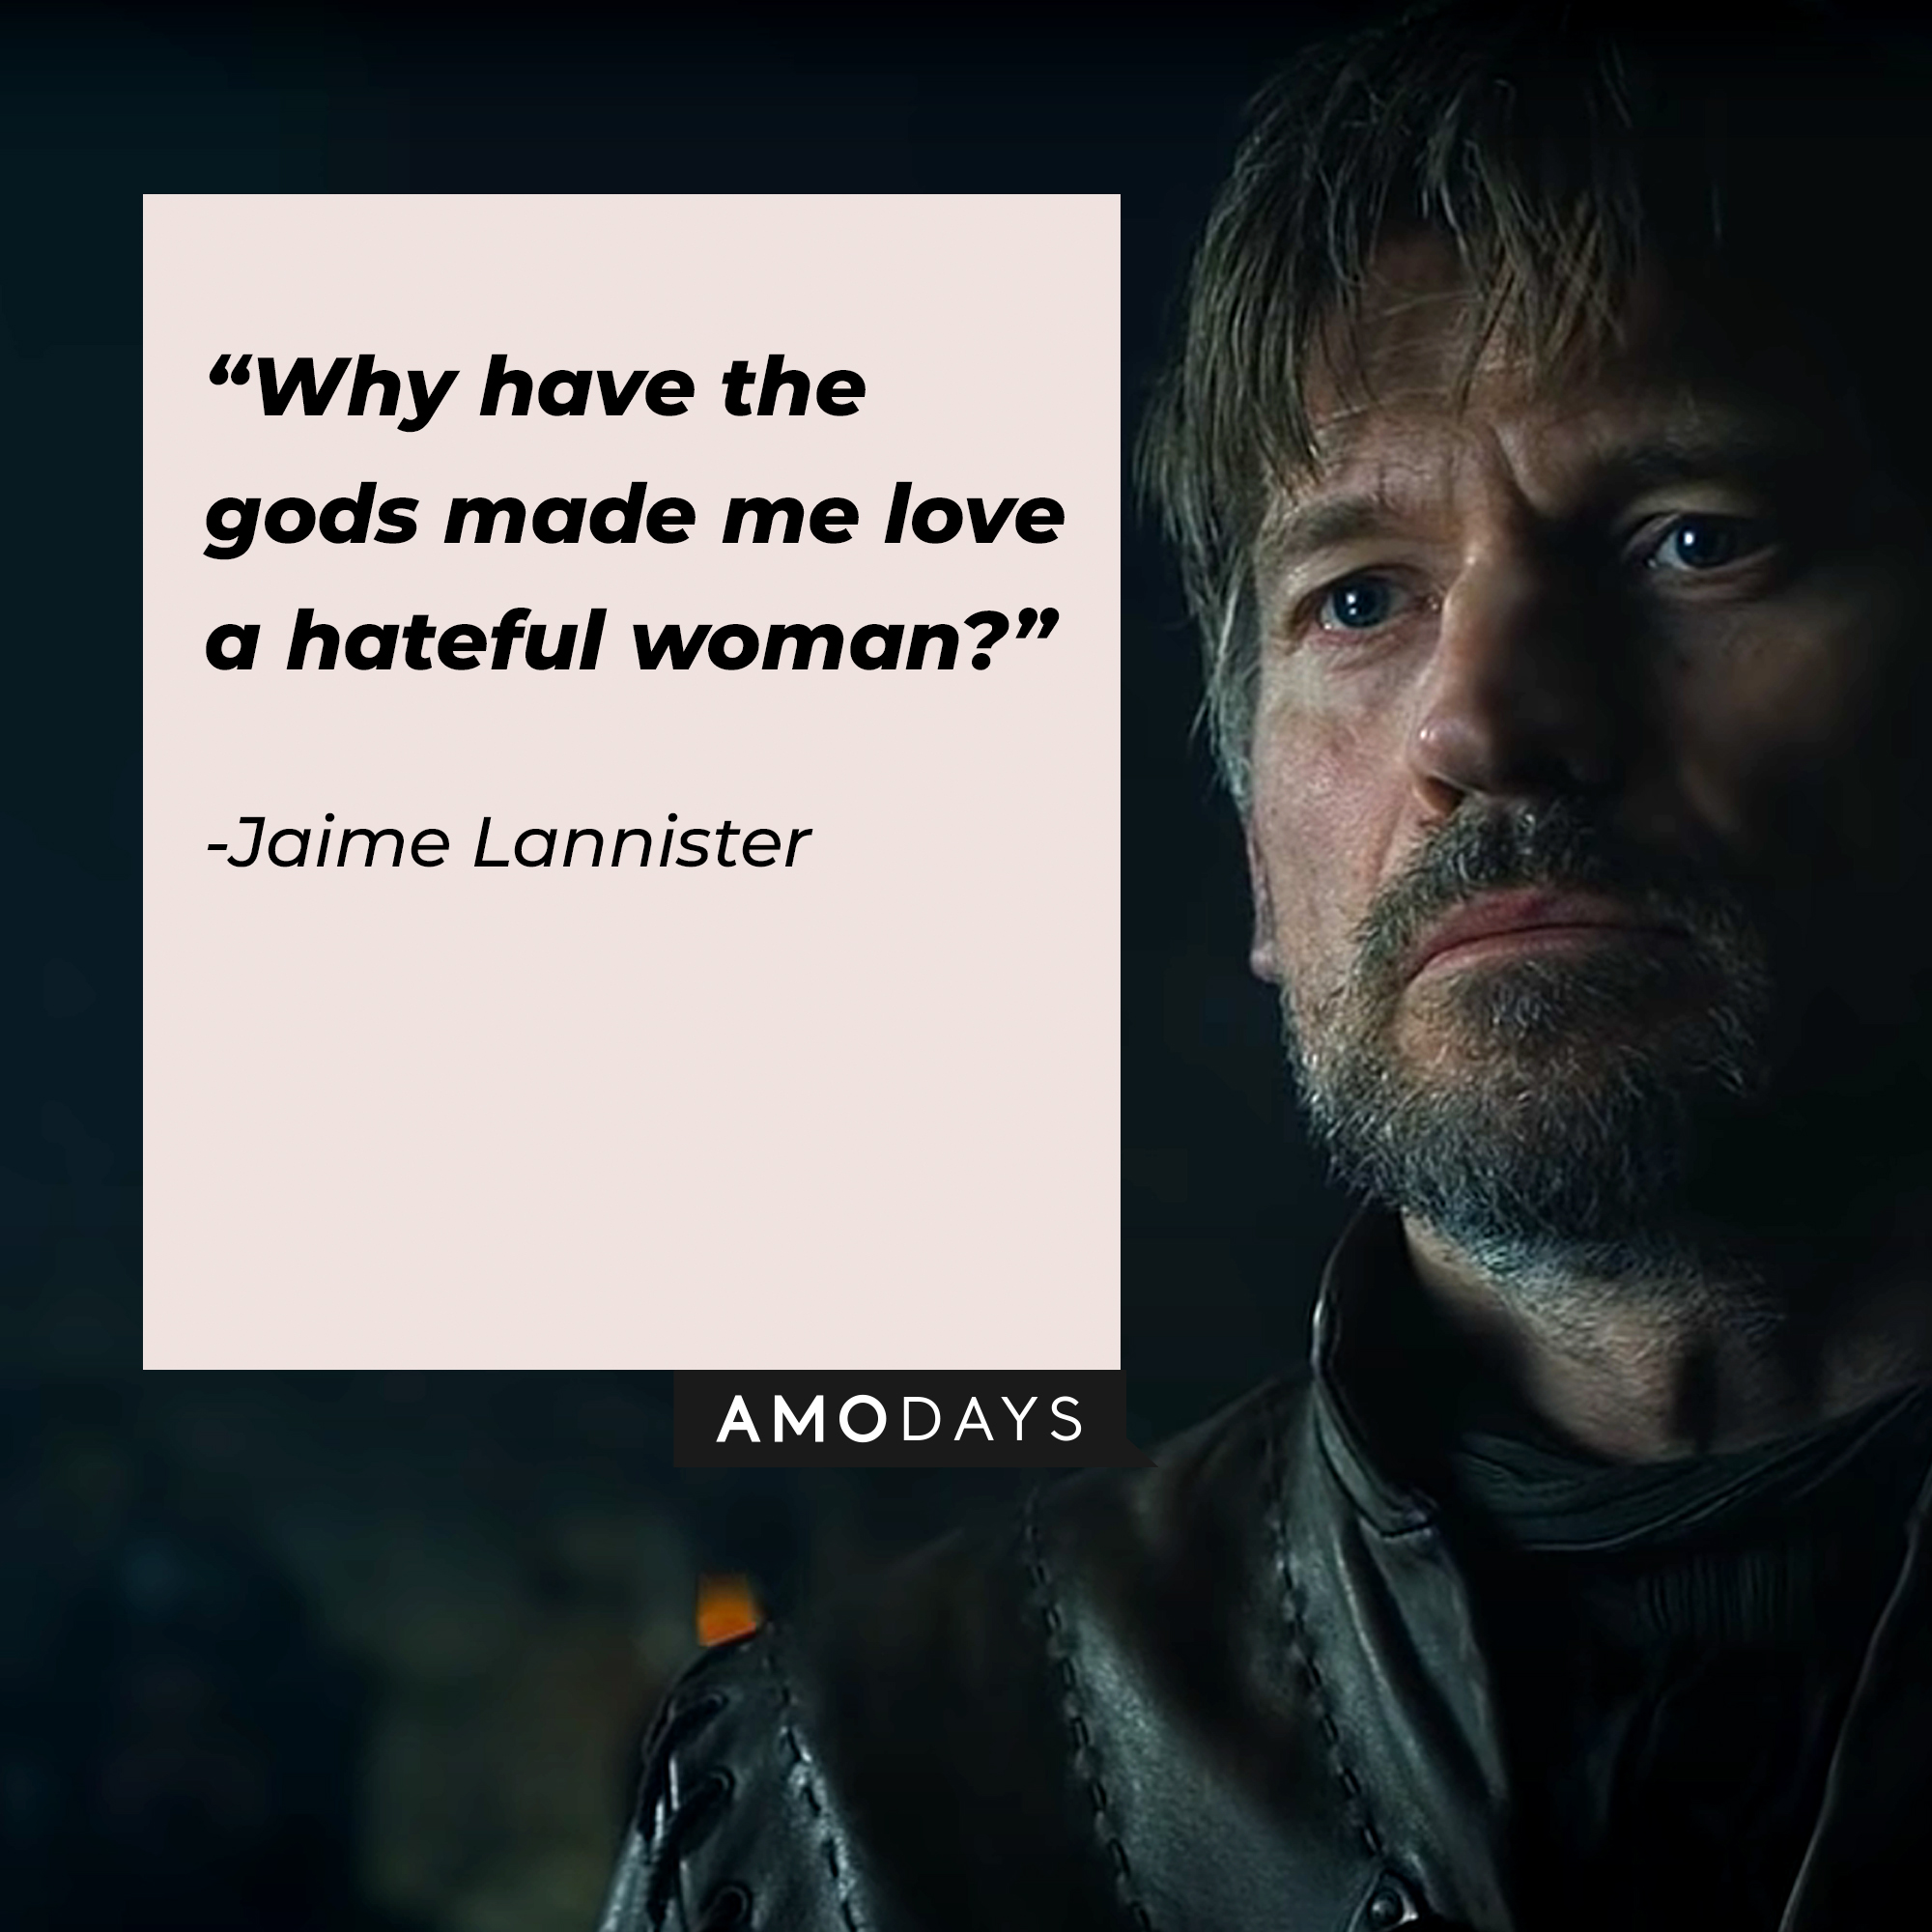 An image of Jaime Lannister, played by Nikolaj Coster-Waldau, with his quote: "Why have the gods made me love a hateful woman?" | Source: facebook.com/Game of Thrones